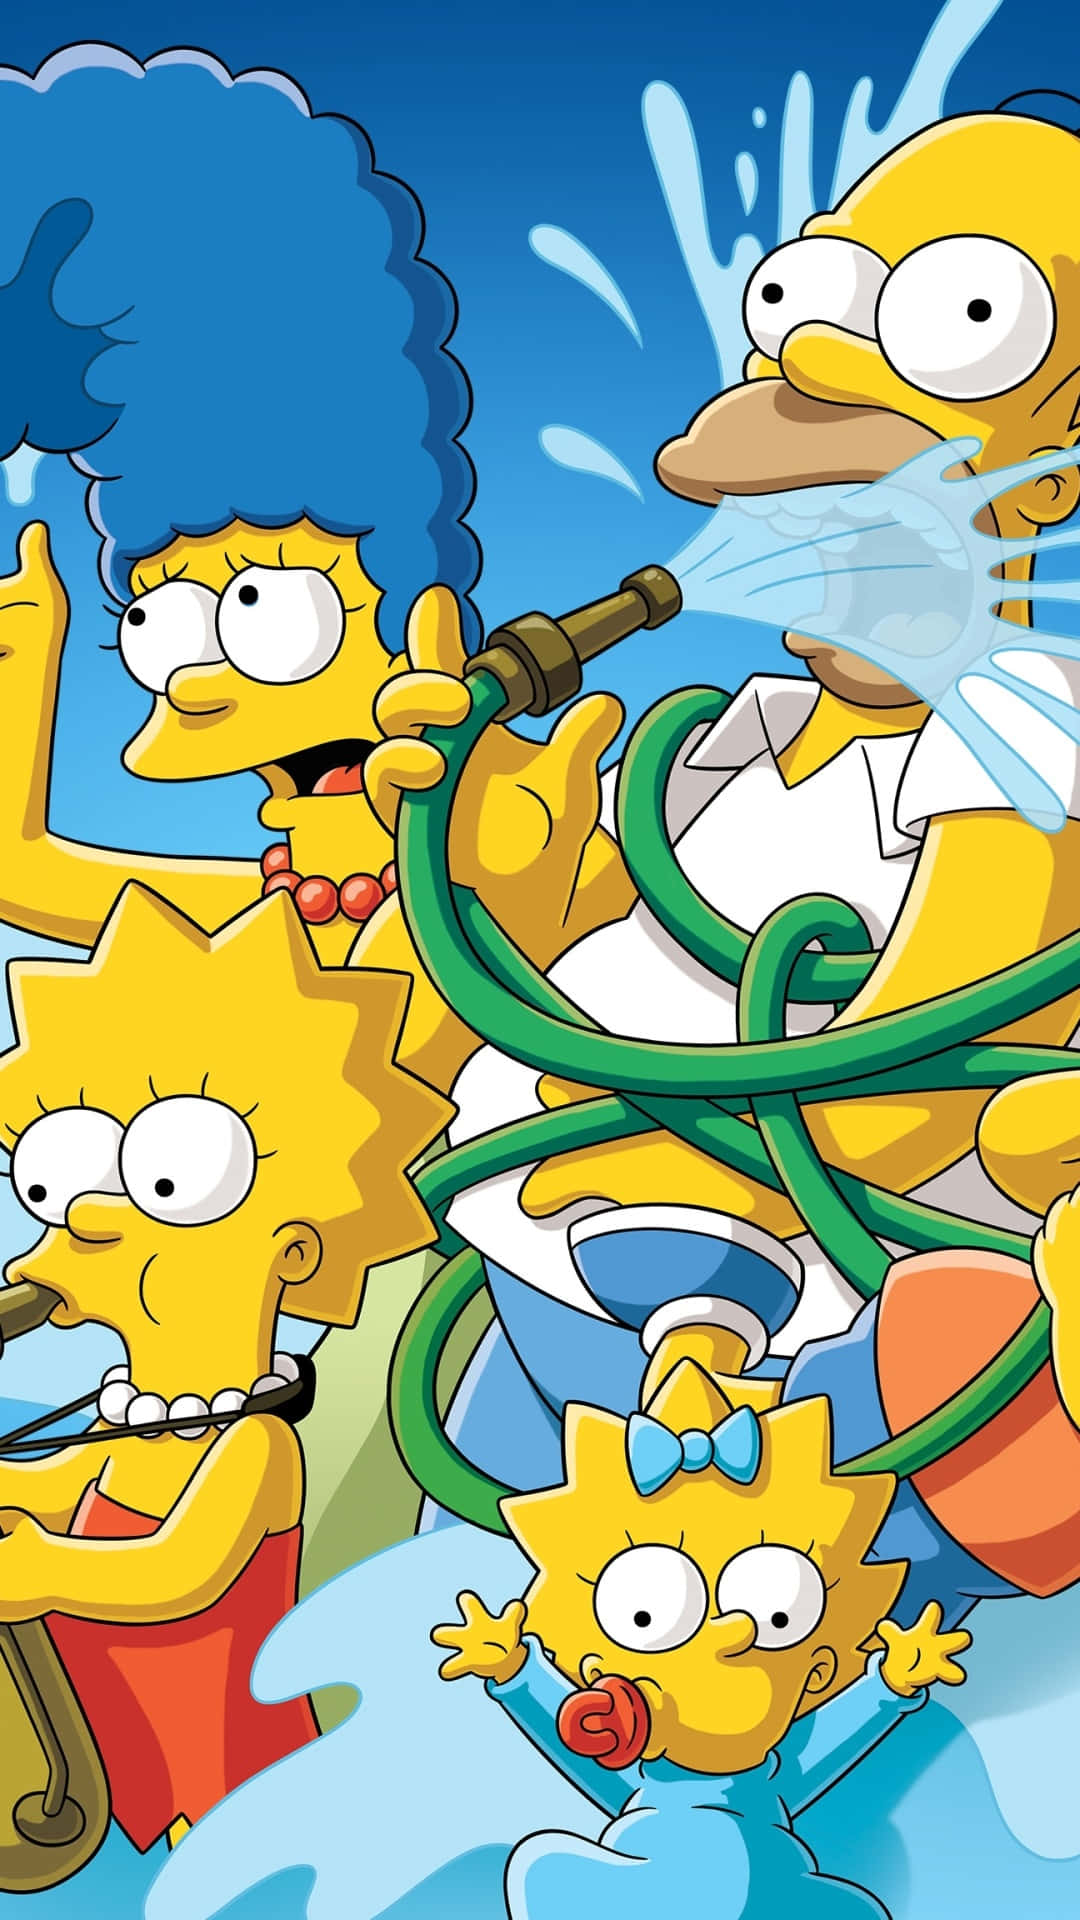 Enjoying Good Times with Friends and Family on the Simpsons